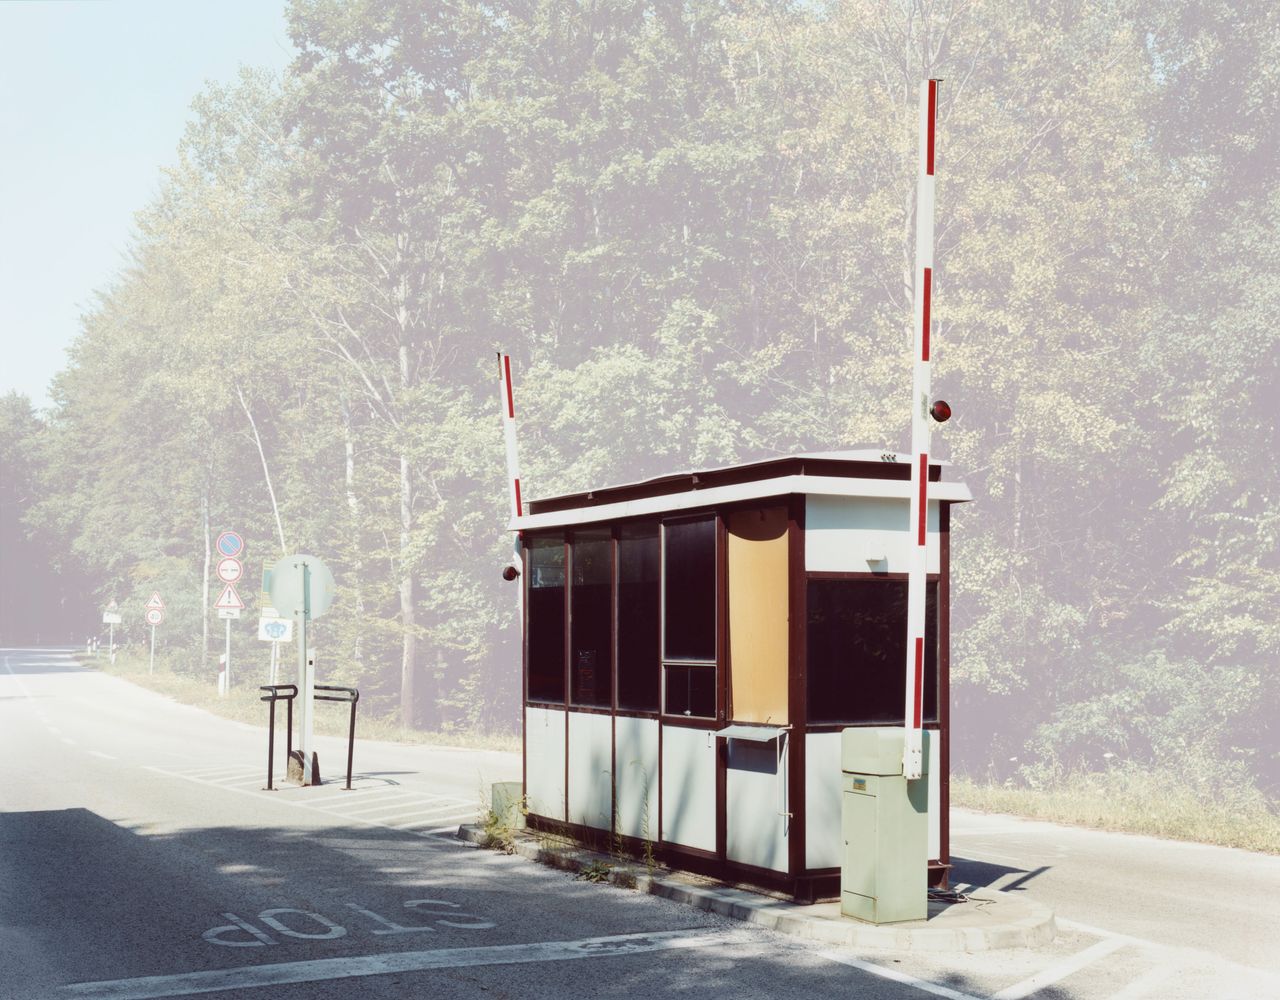 Polish-born, Germany-based photographer took photos of defunct European border crossings to challenge how Europeans consider the notion of "borders." This photo was taken at the Hungarian-Slovenian border.